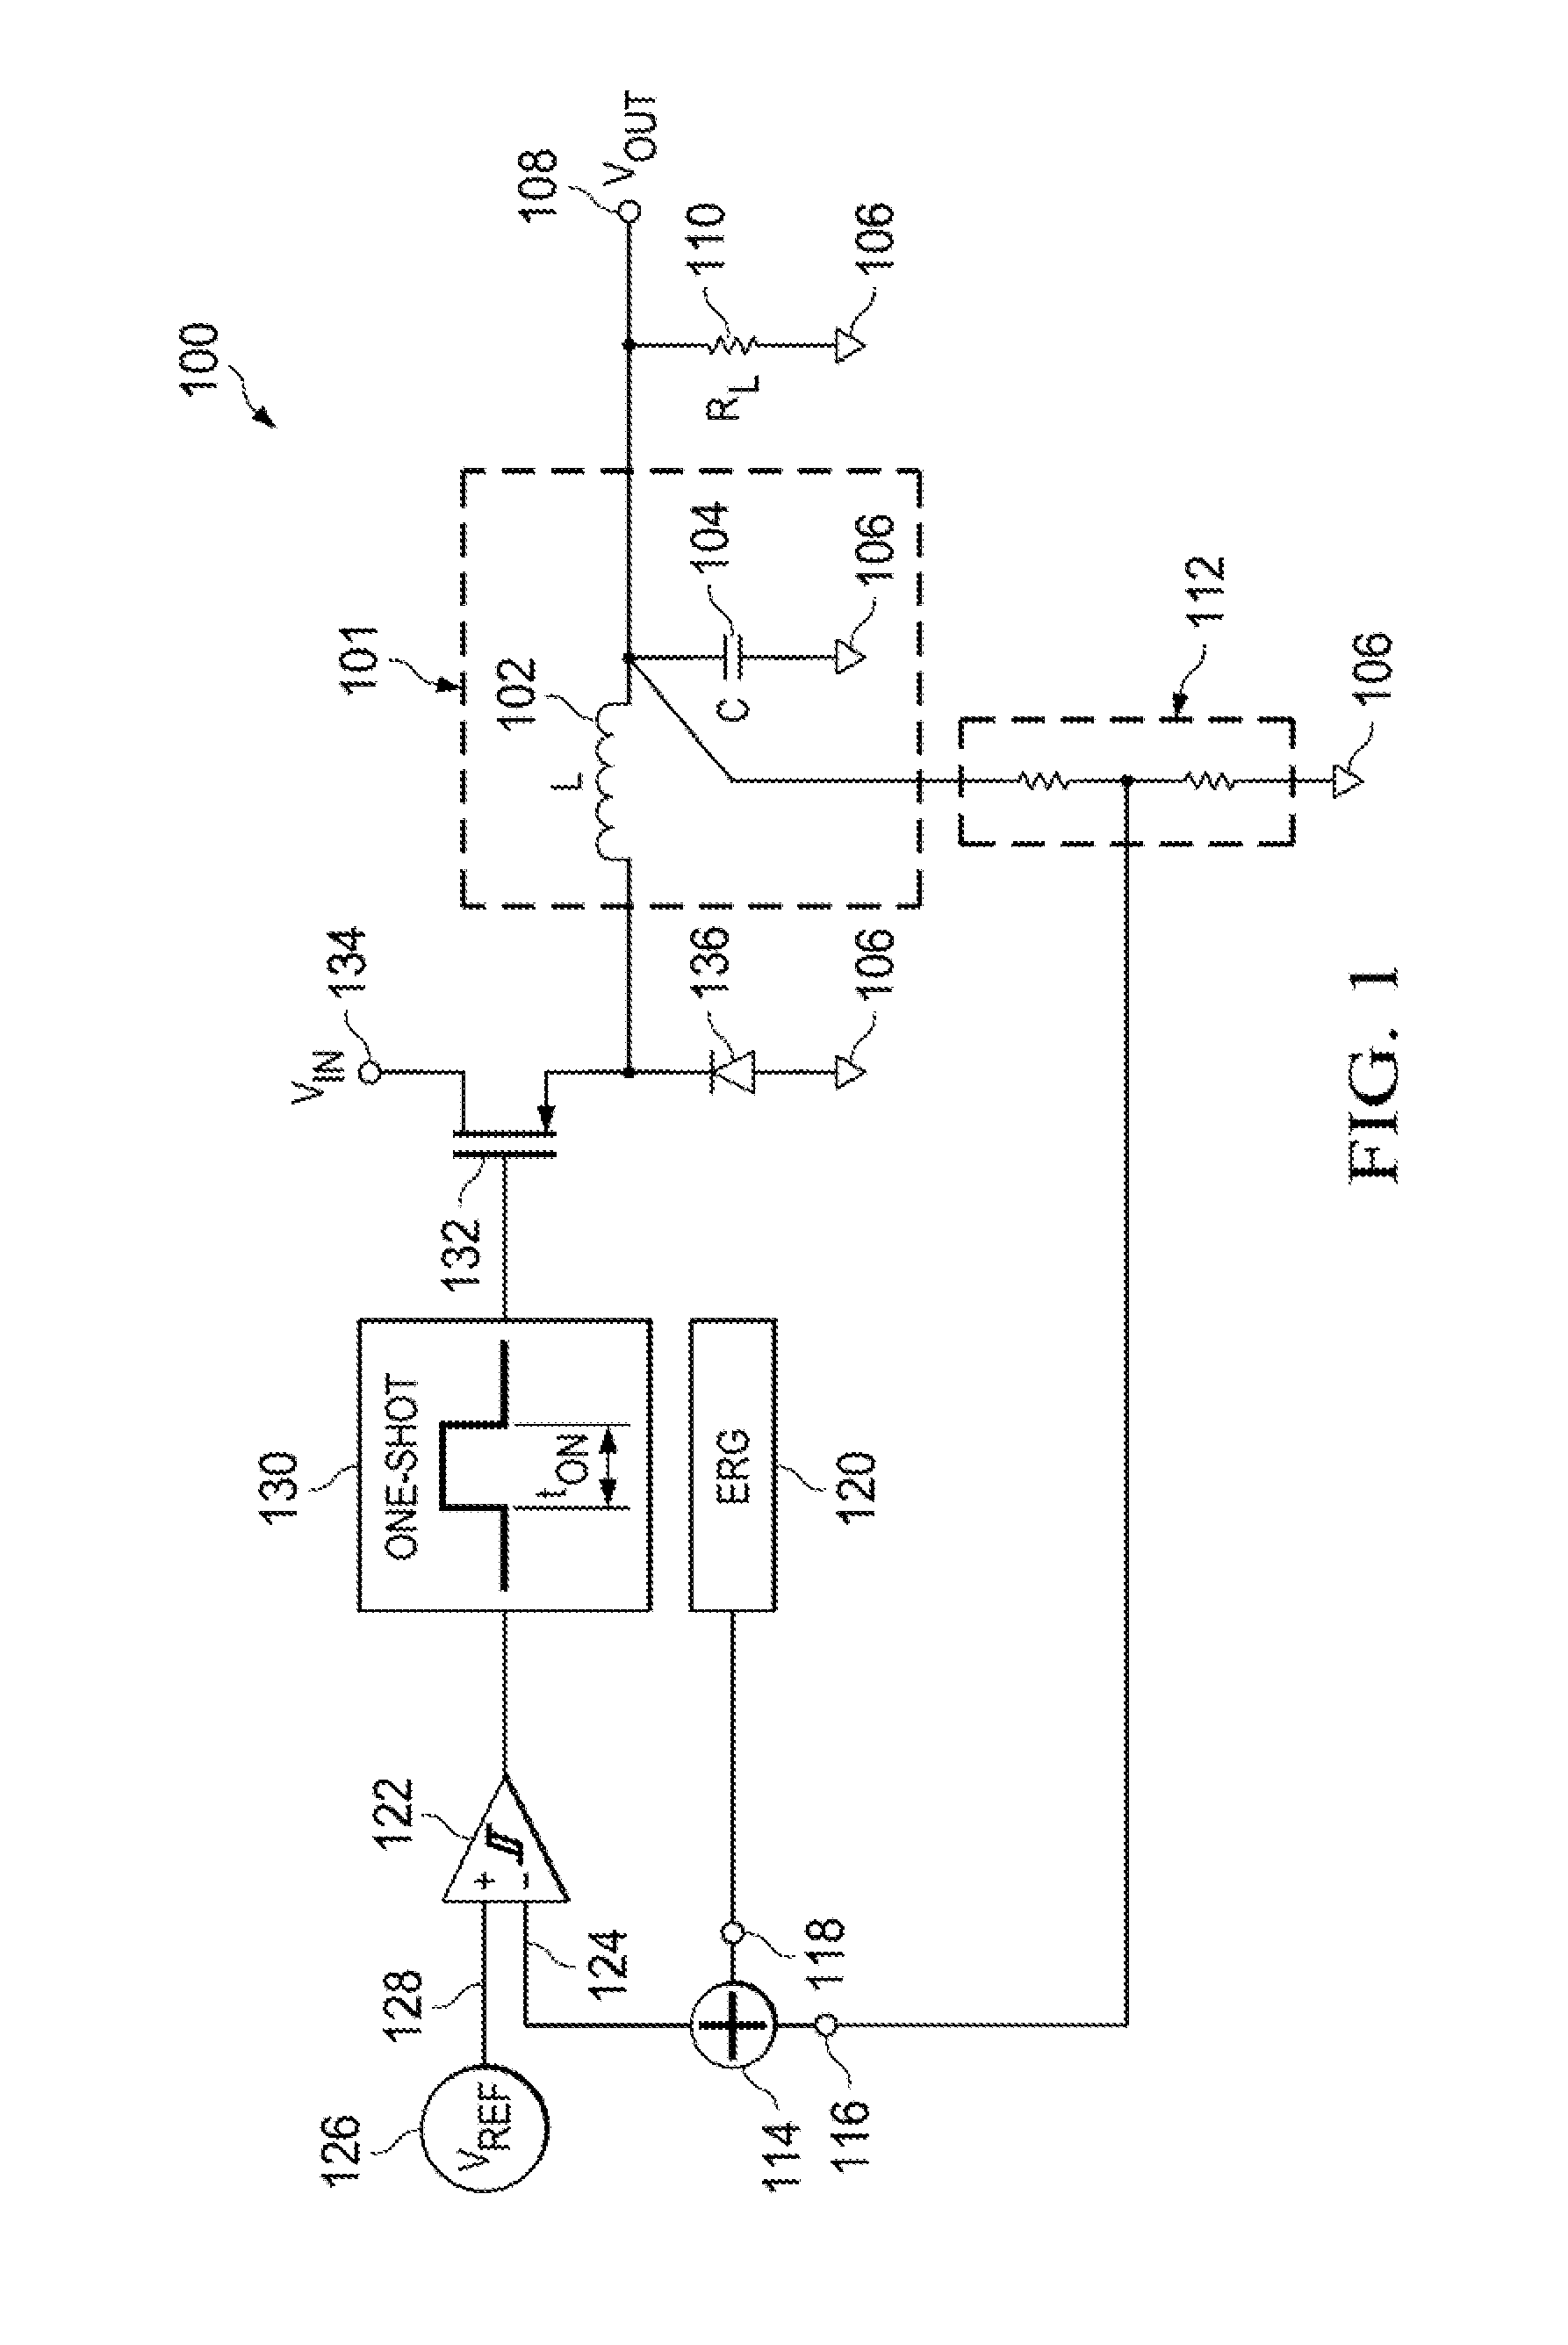 Minimum on-time control for low load dc/dc converter